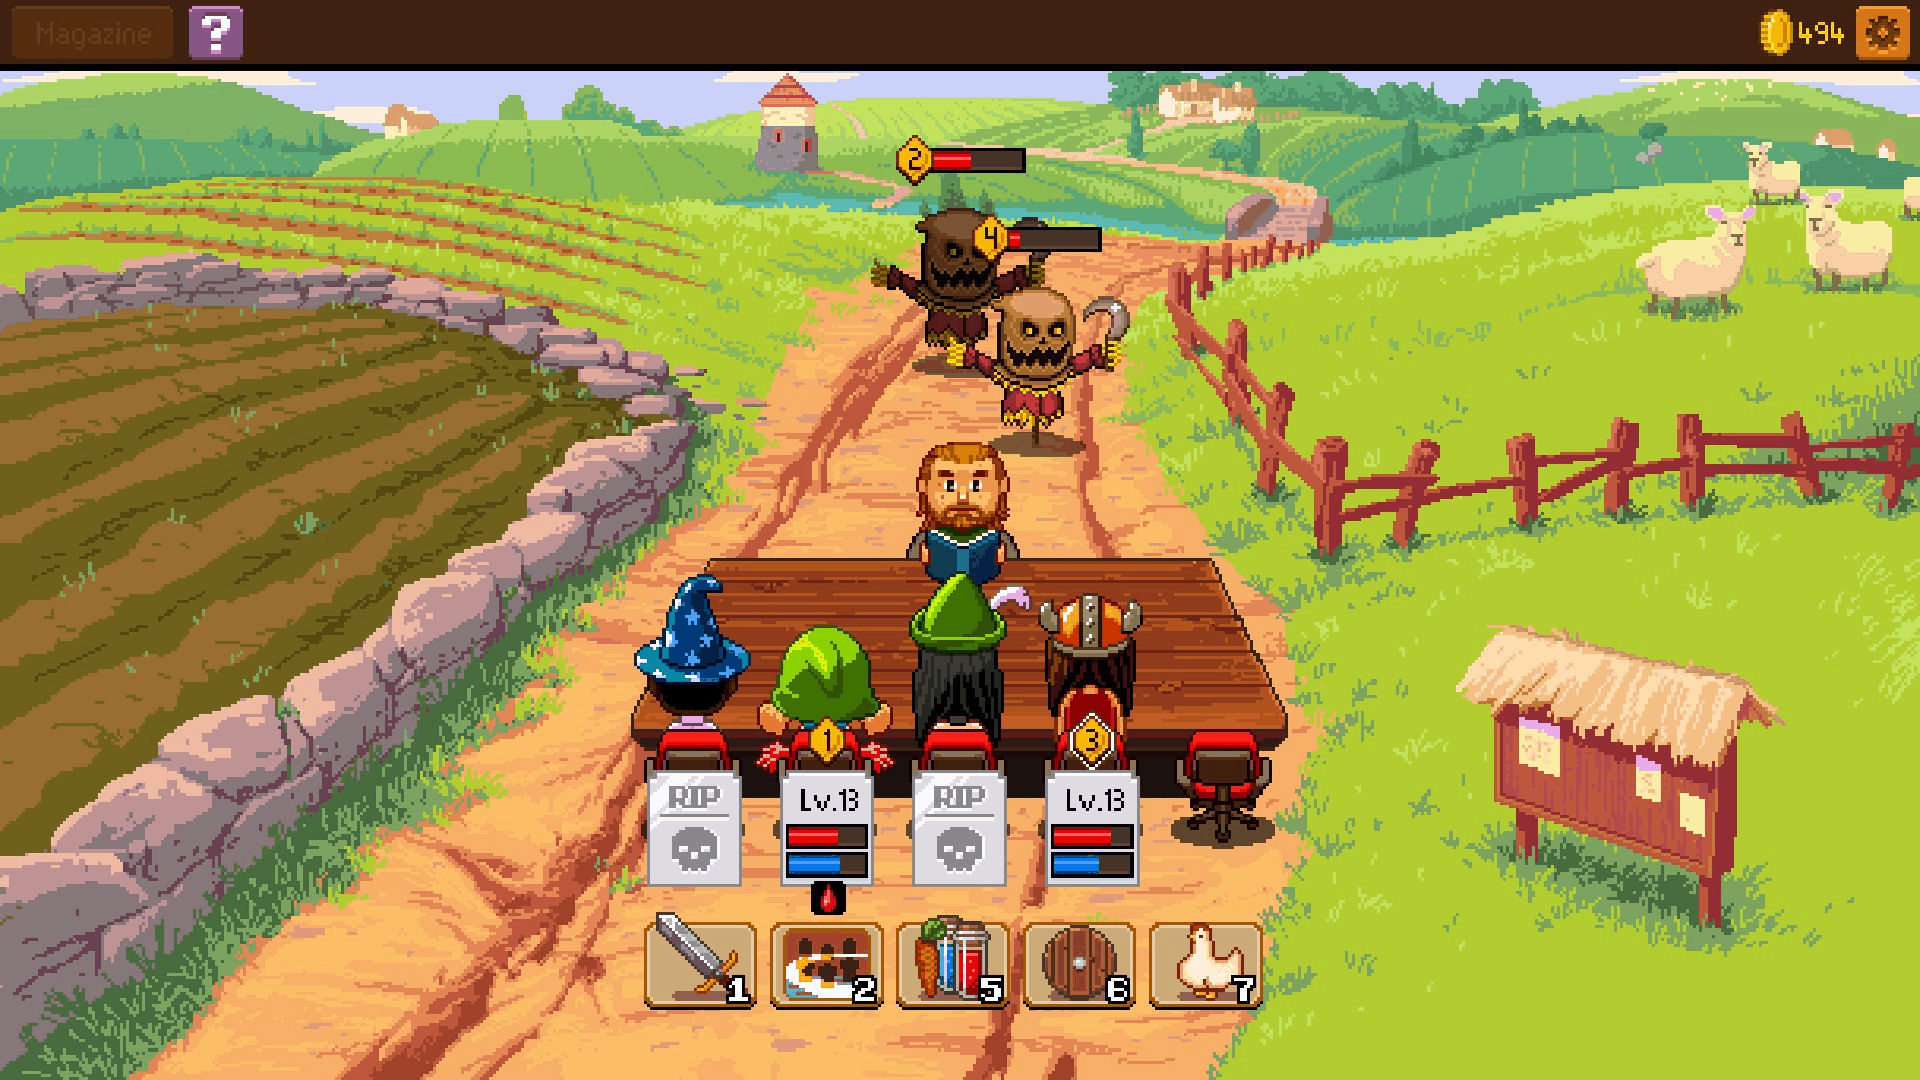 Knights of Pen and Paper 2 Farmland combat